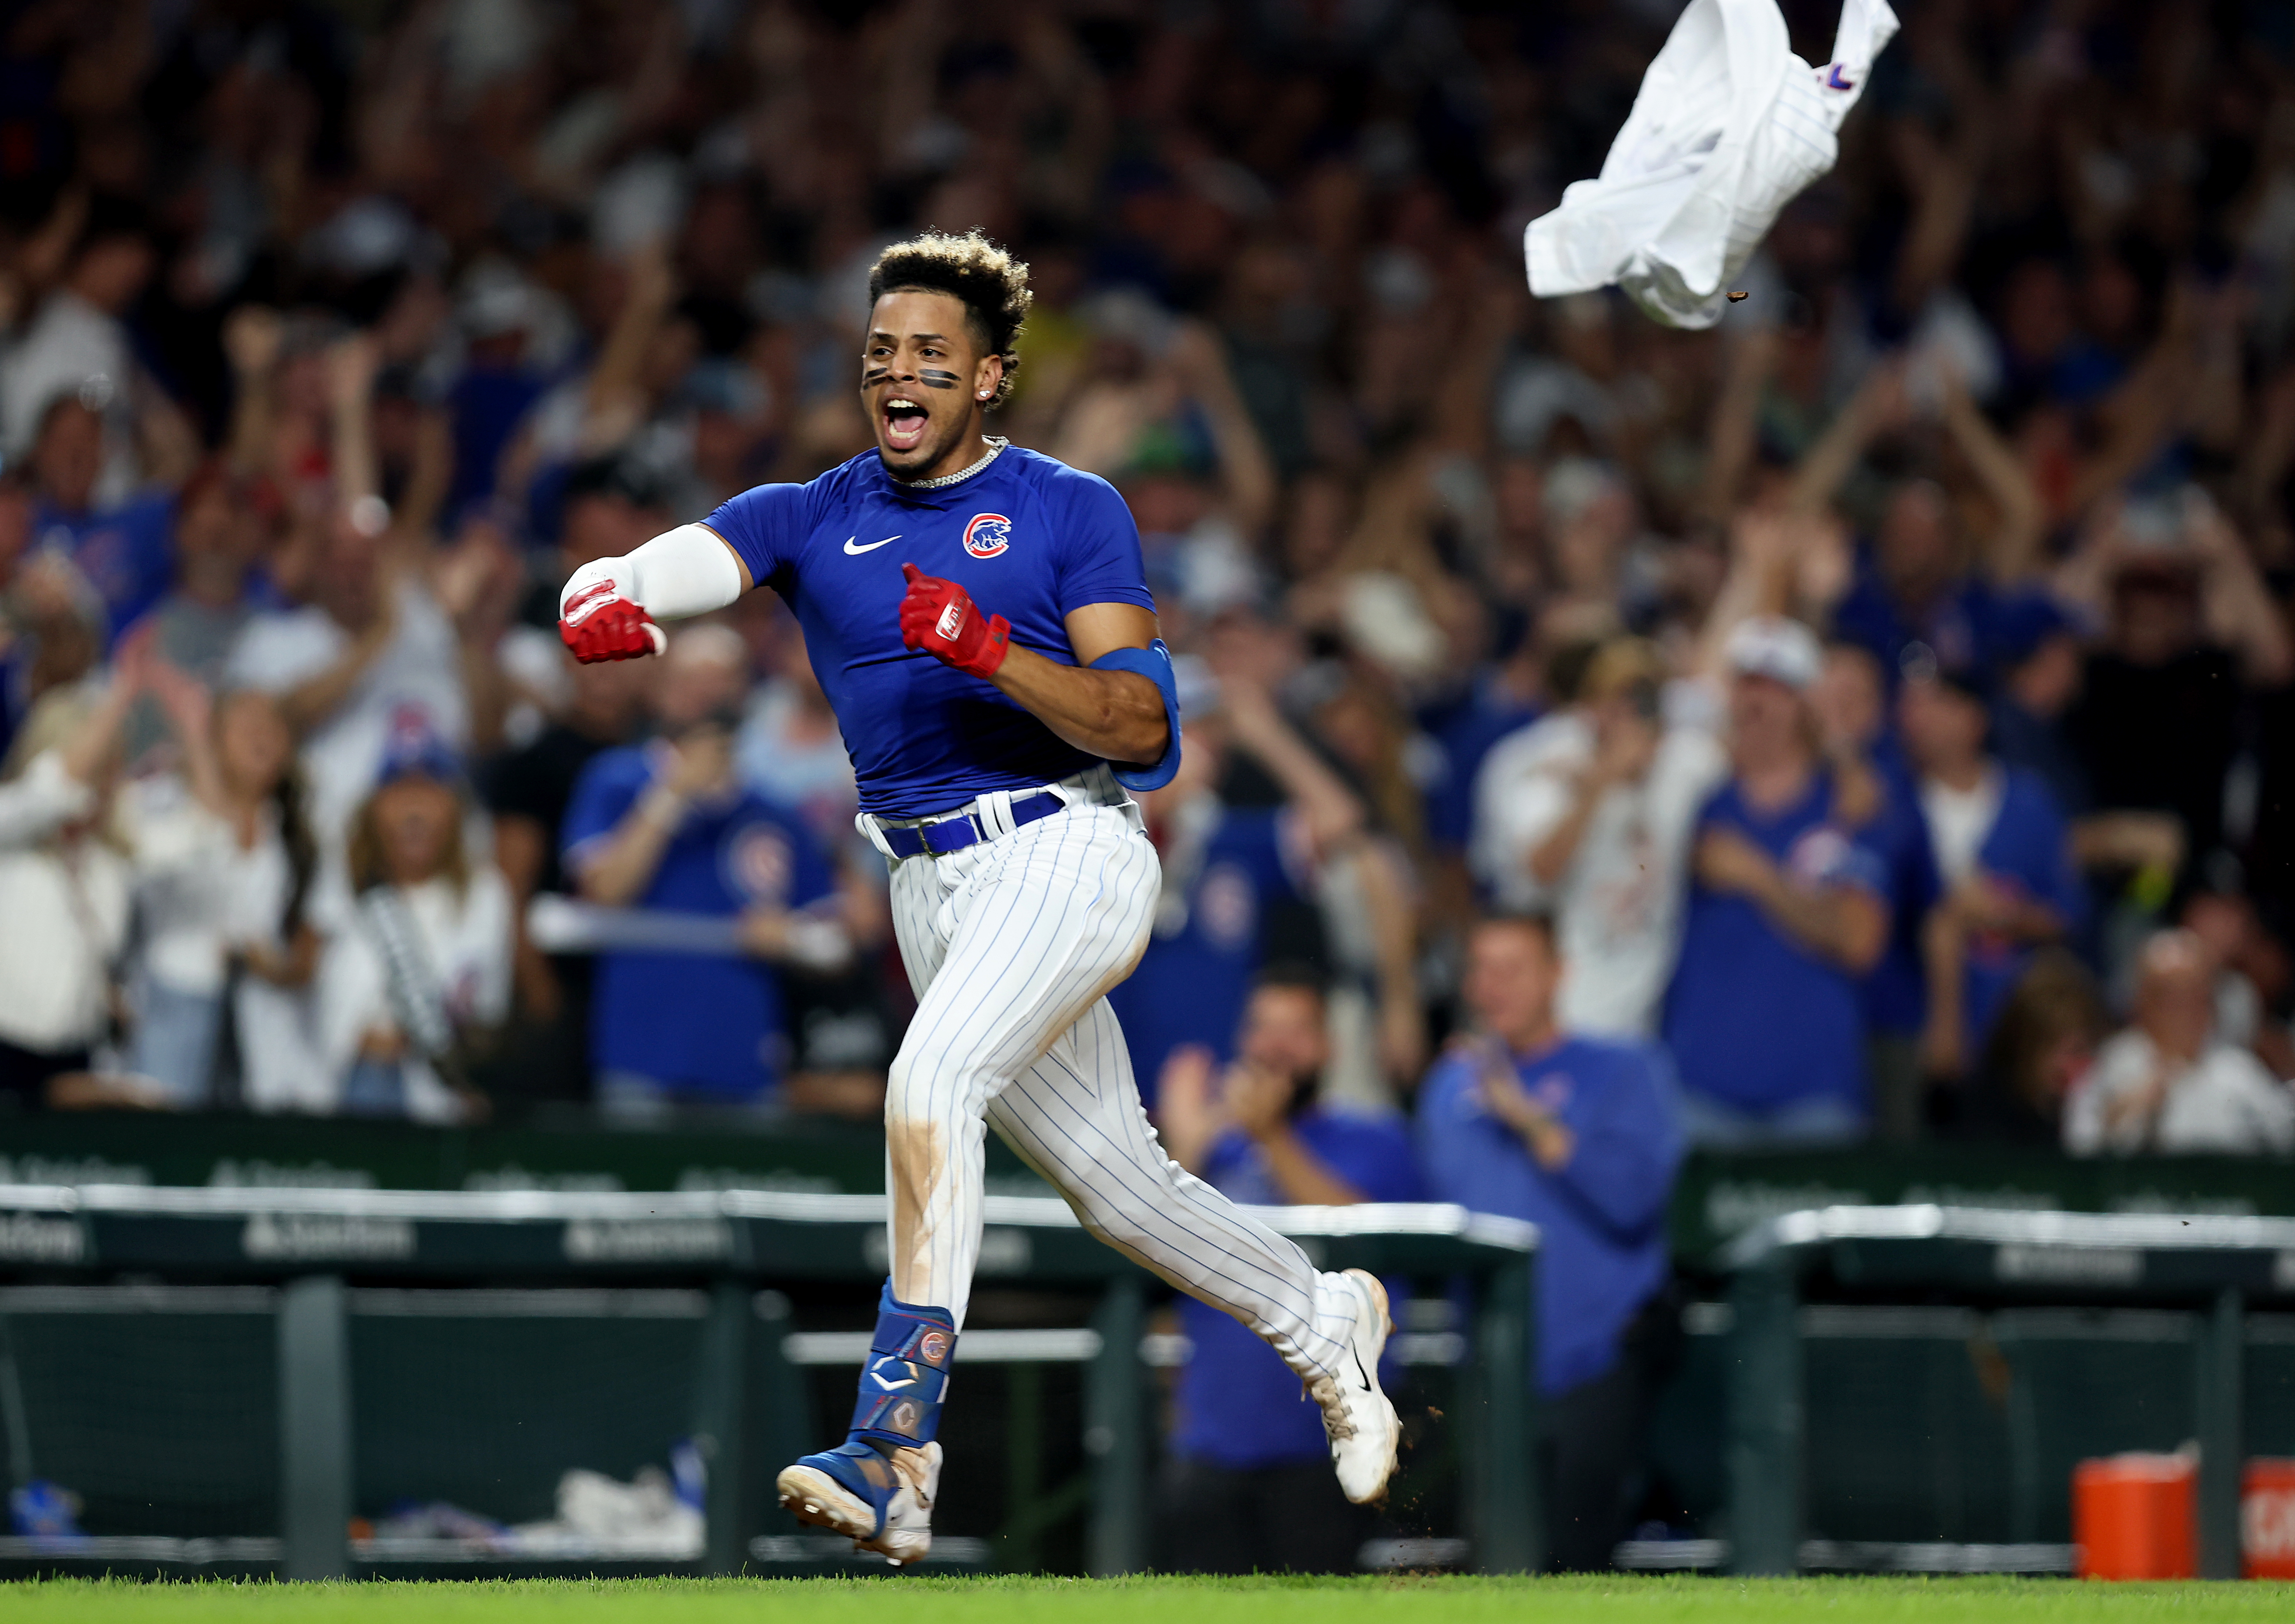 Chicago baseball report: Cubs start 7-game road trip